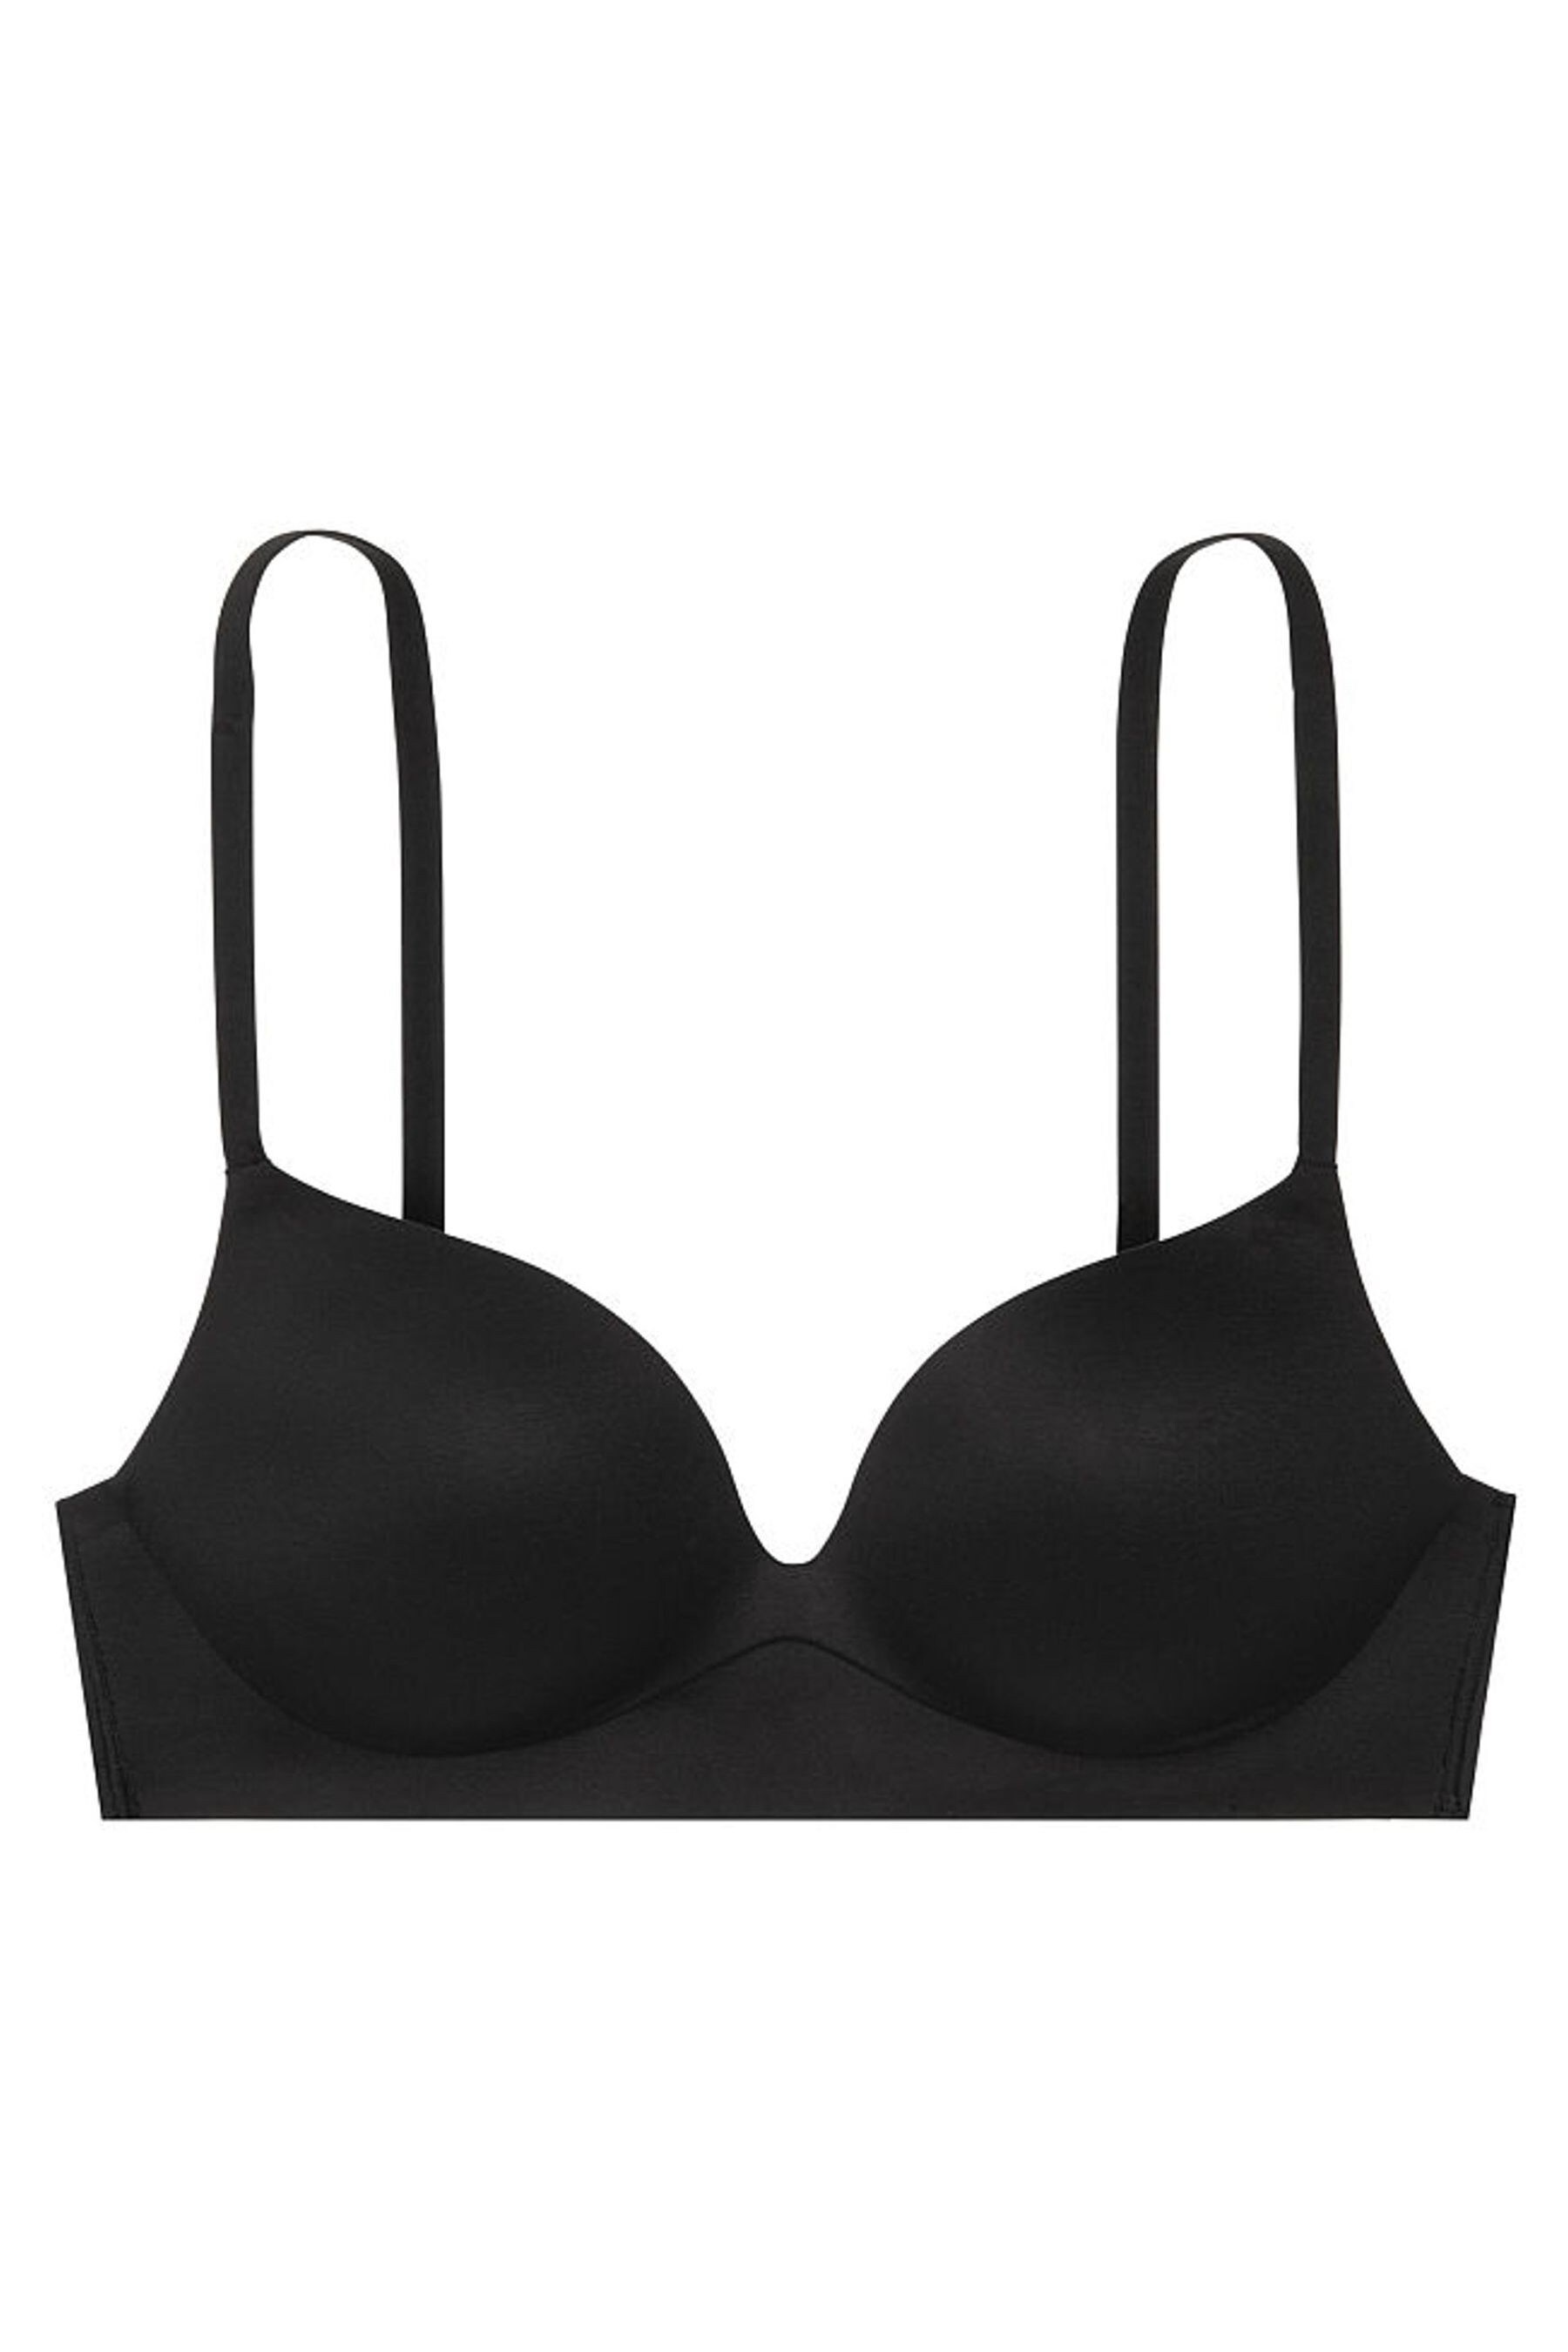 Buy Victoria's Secret Black Smooth Non Wired Push Up Bra from the Next ...